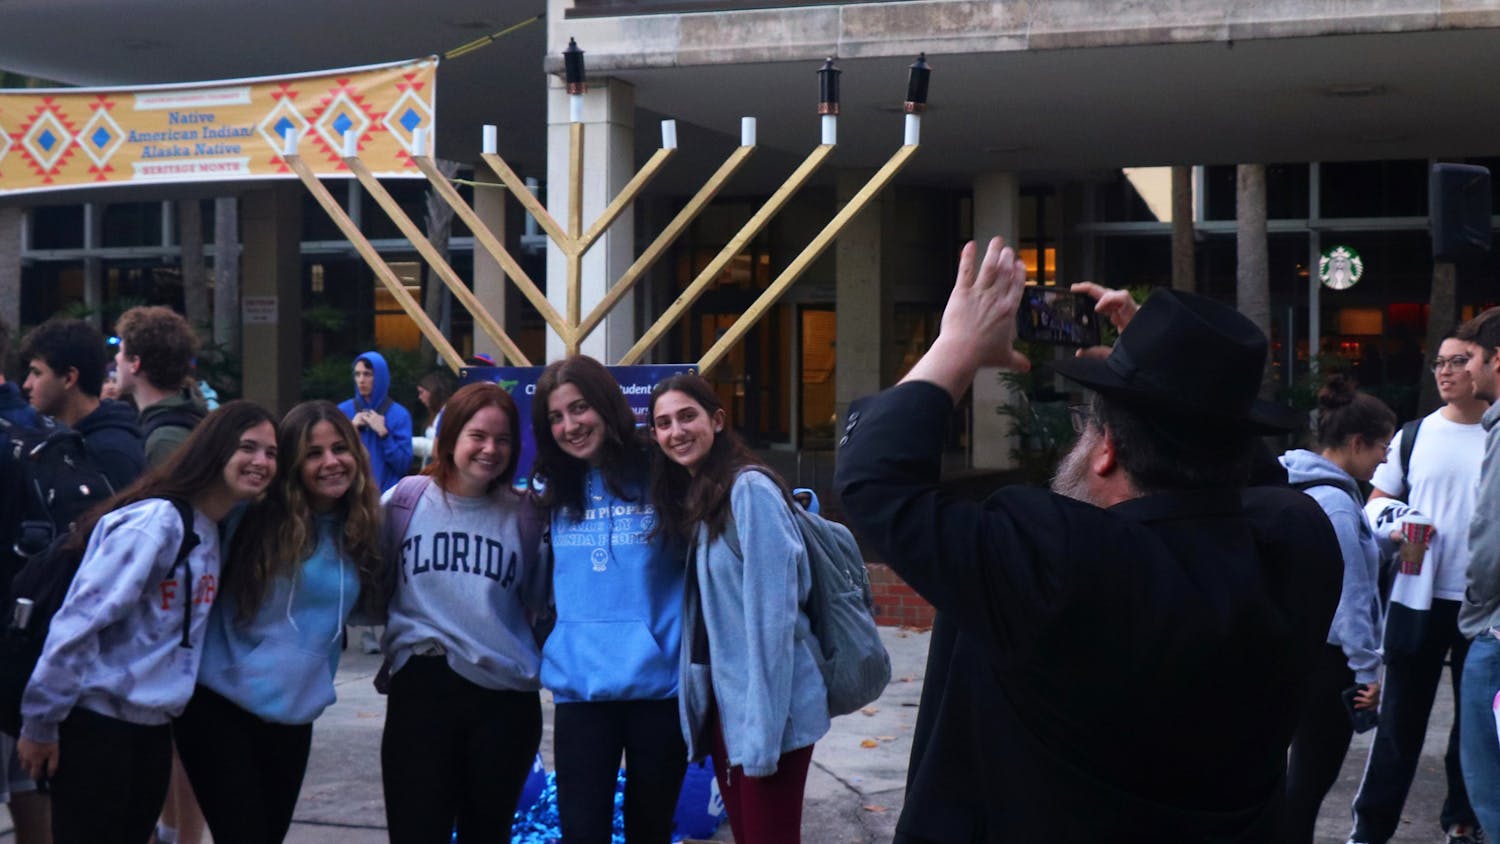 Rabbi Berl Goldman takes a picture of a group of girls in front of the menorah at the Plaza of Americas on Monday, Nov. 29, 2021.